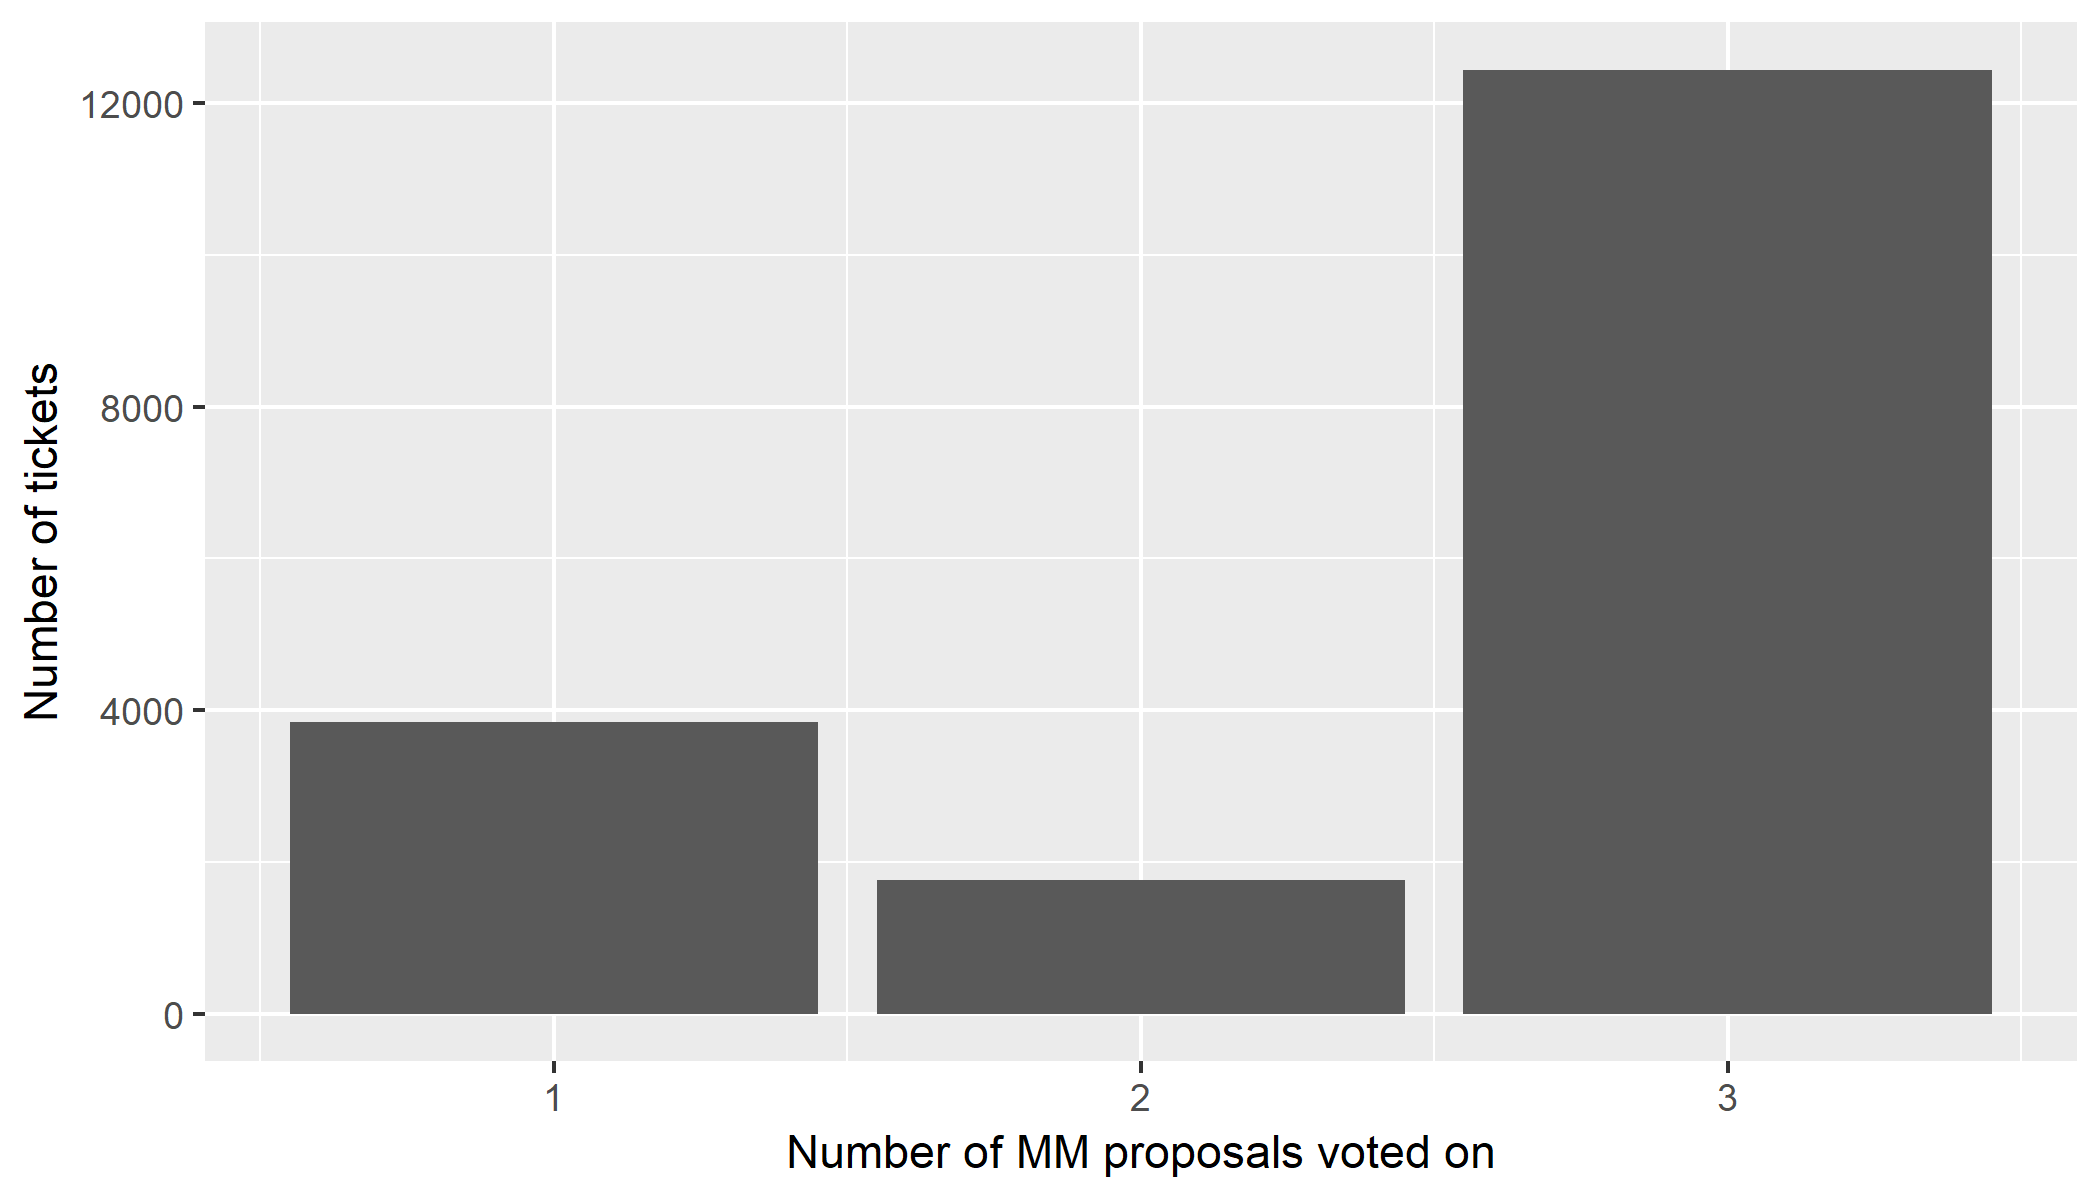 Number of MM proposals voted on per ticket